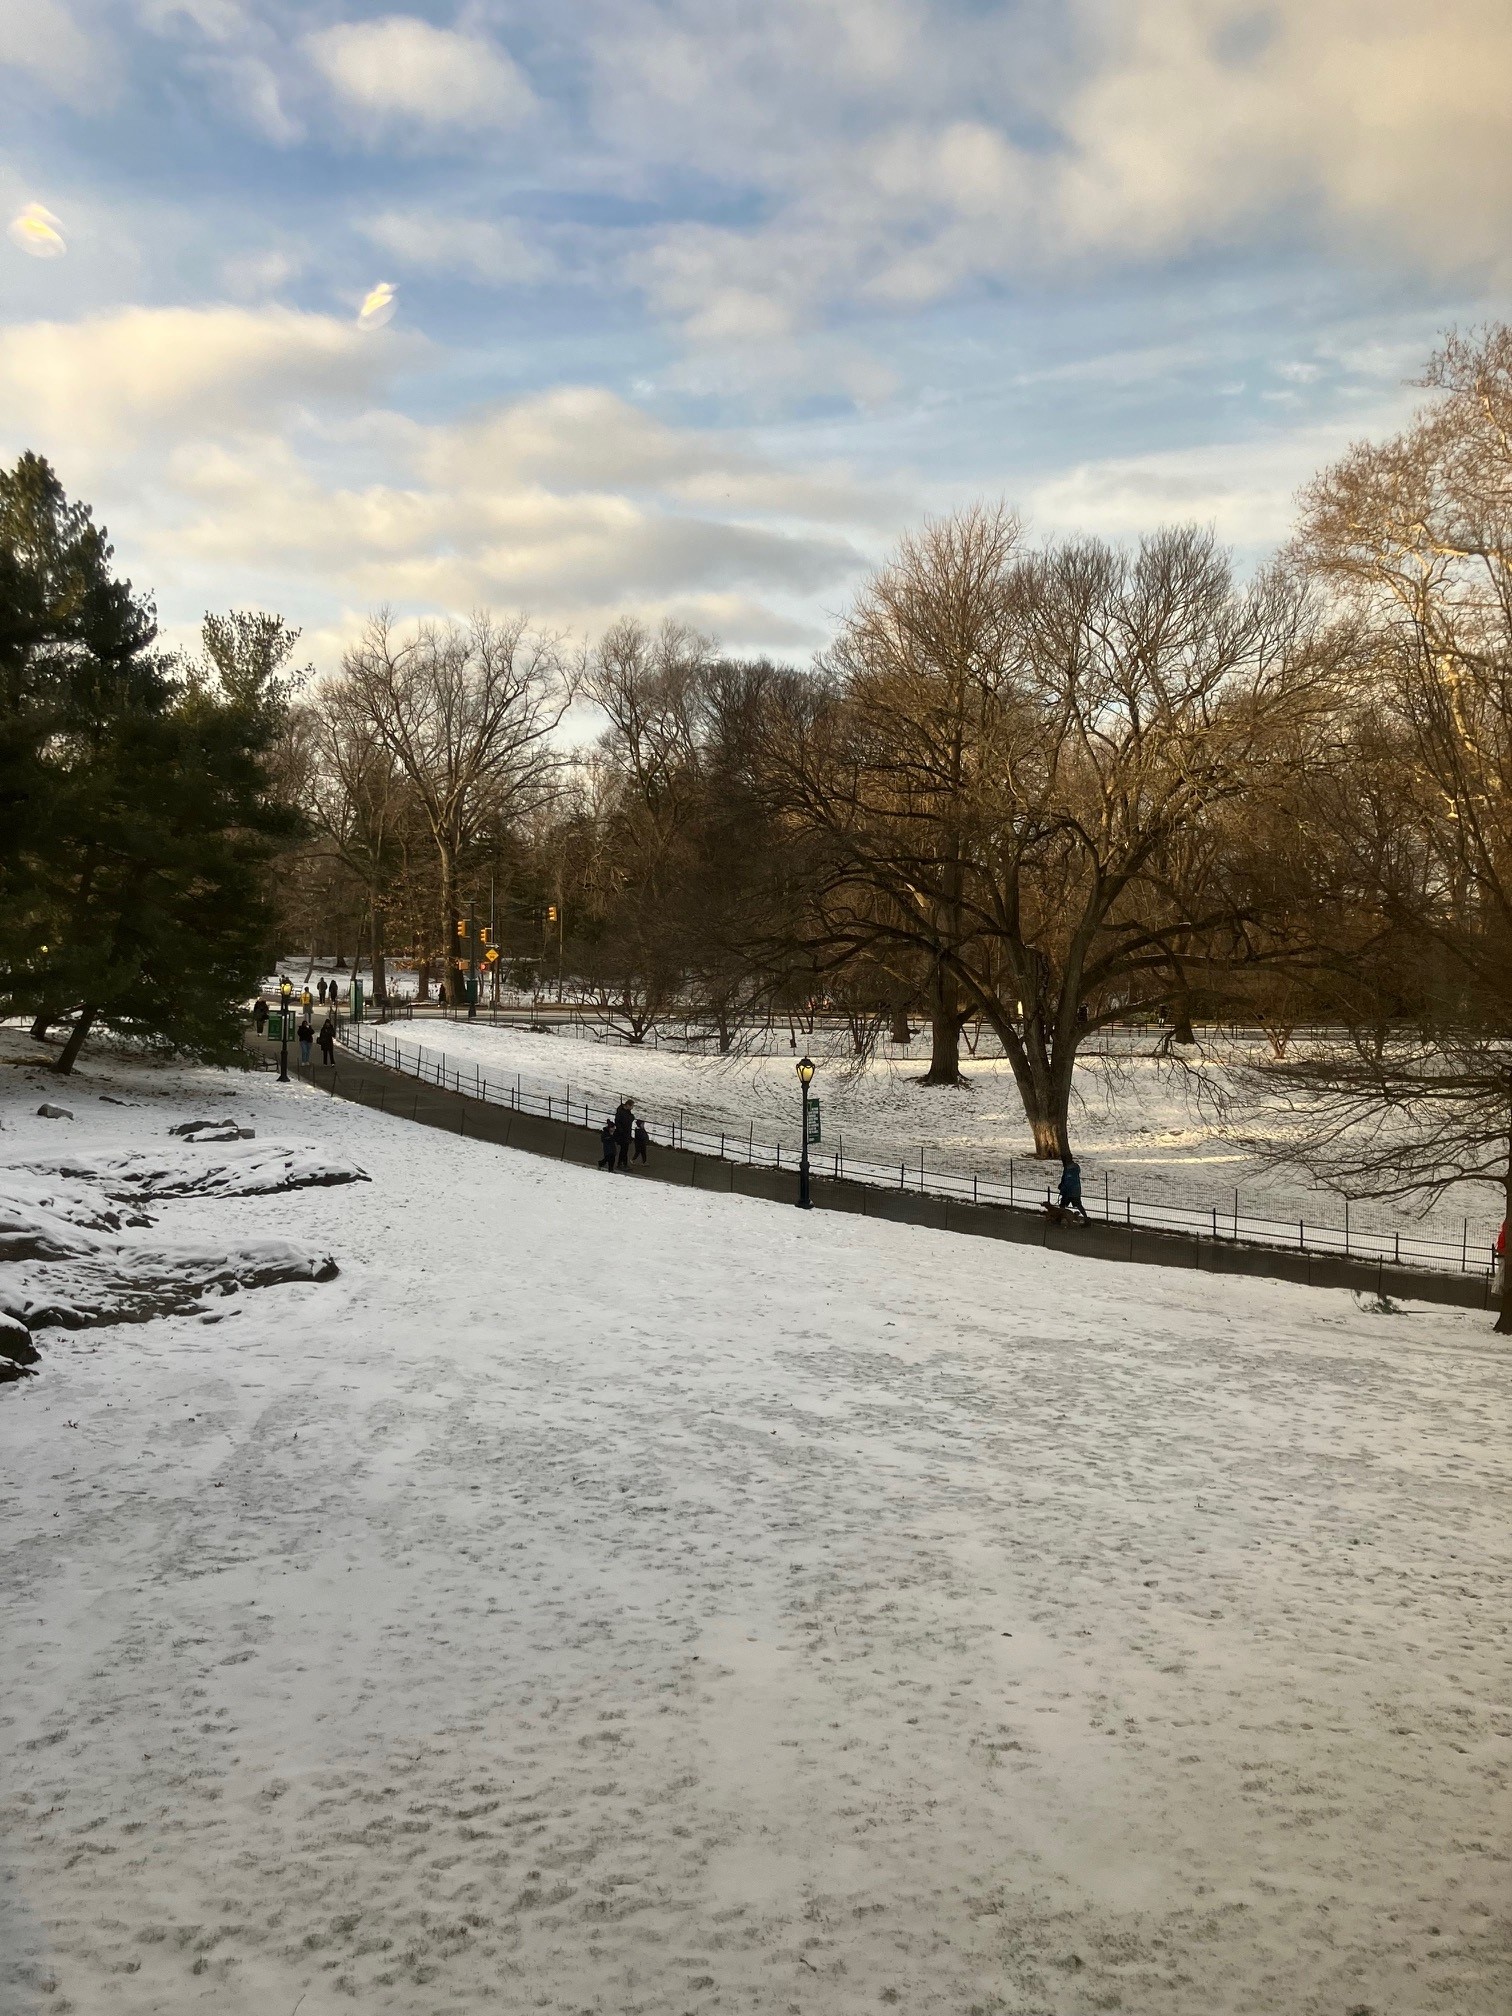 This image shows a snow-covered Central Park